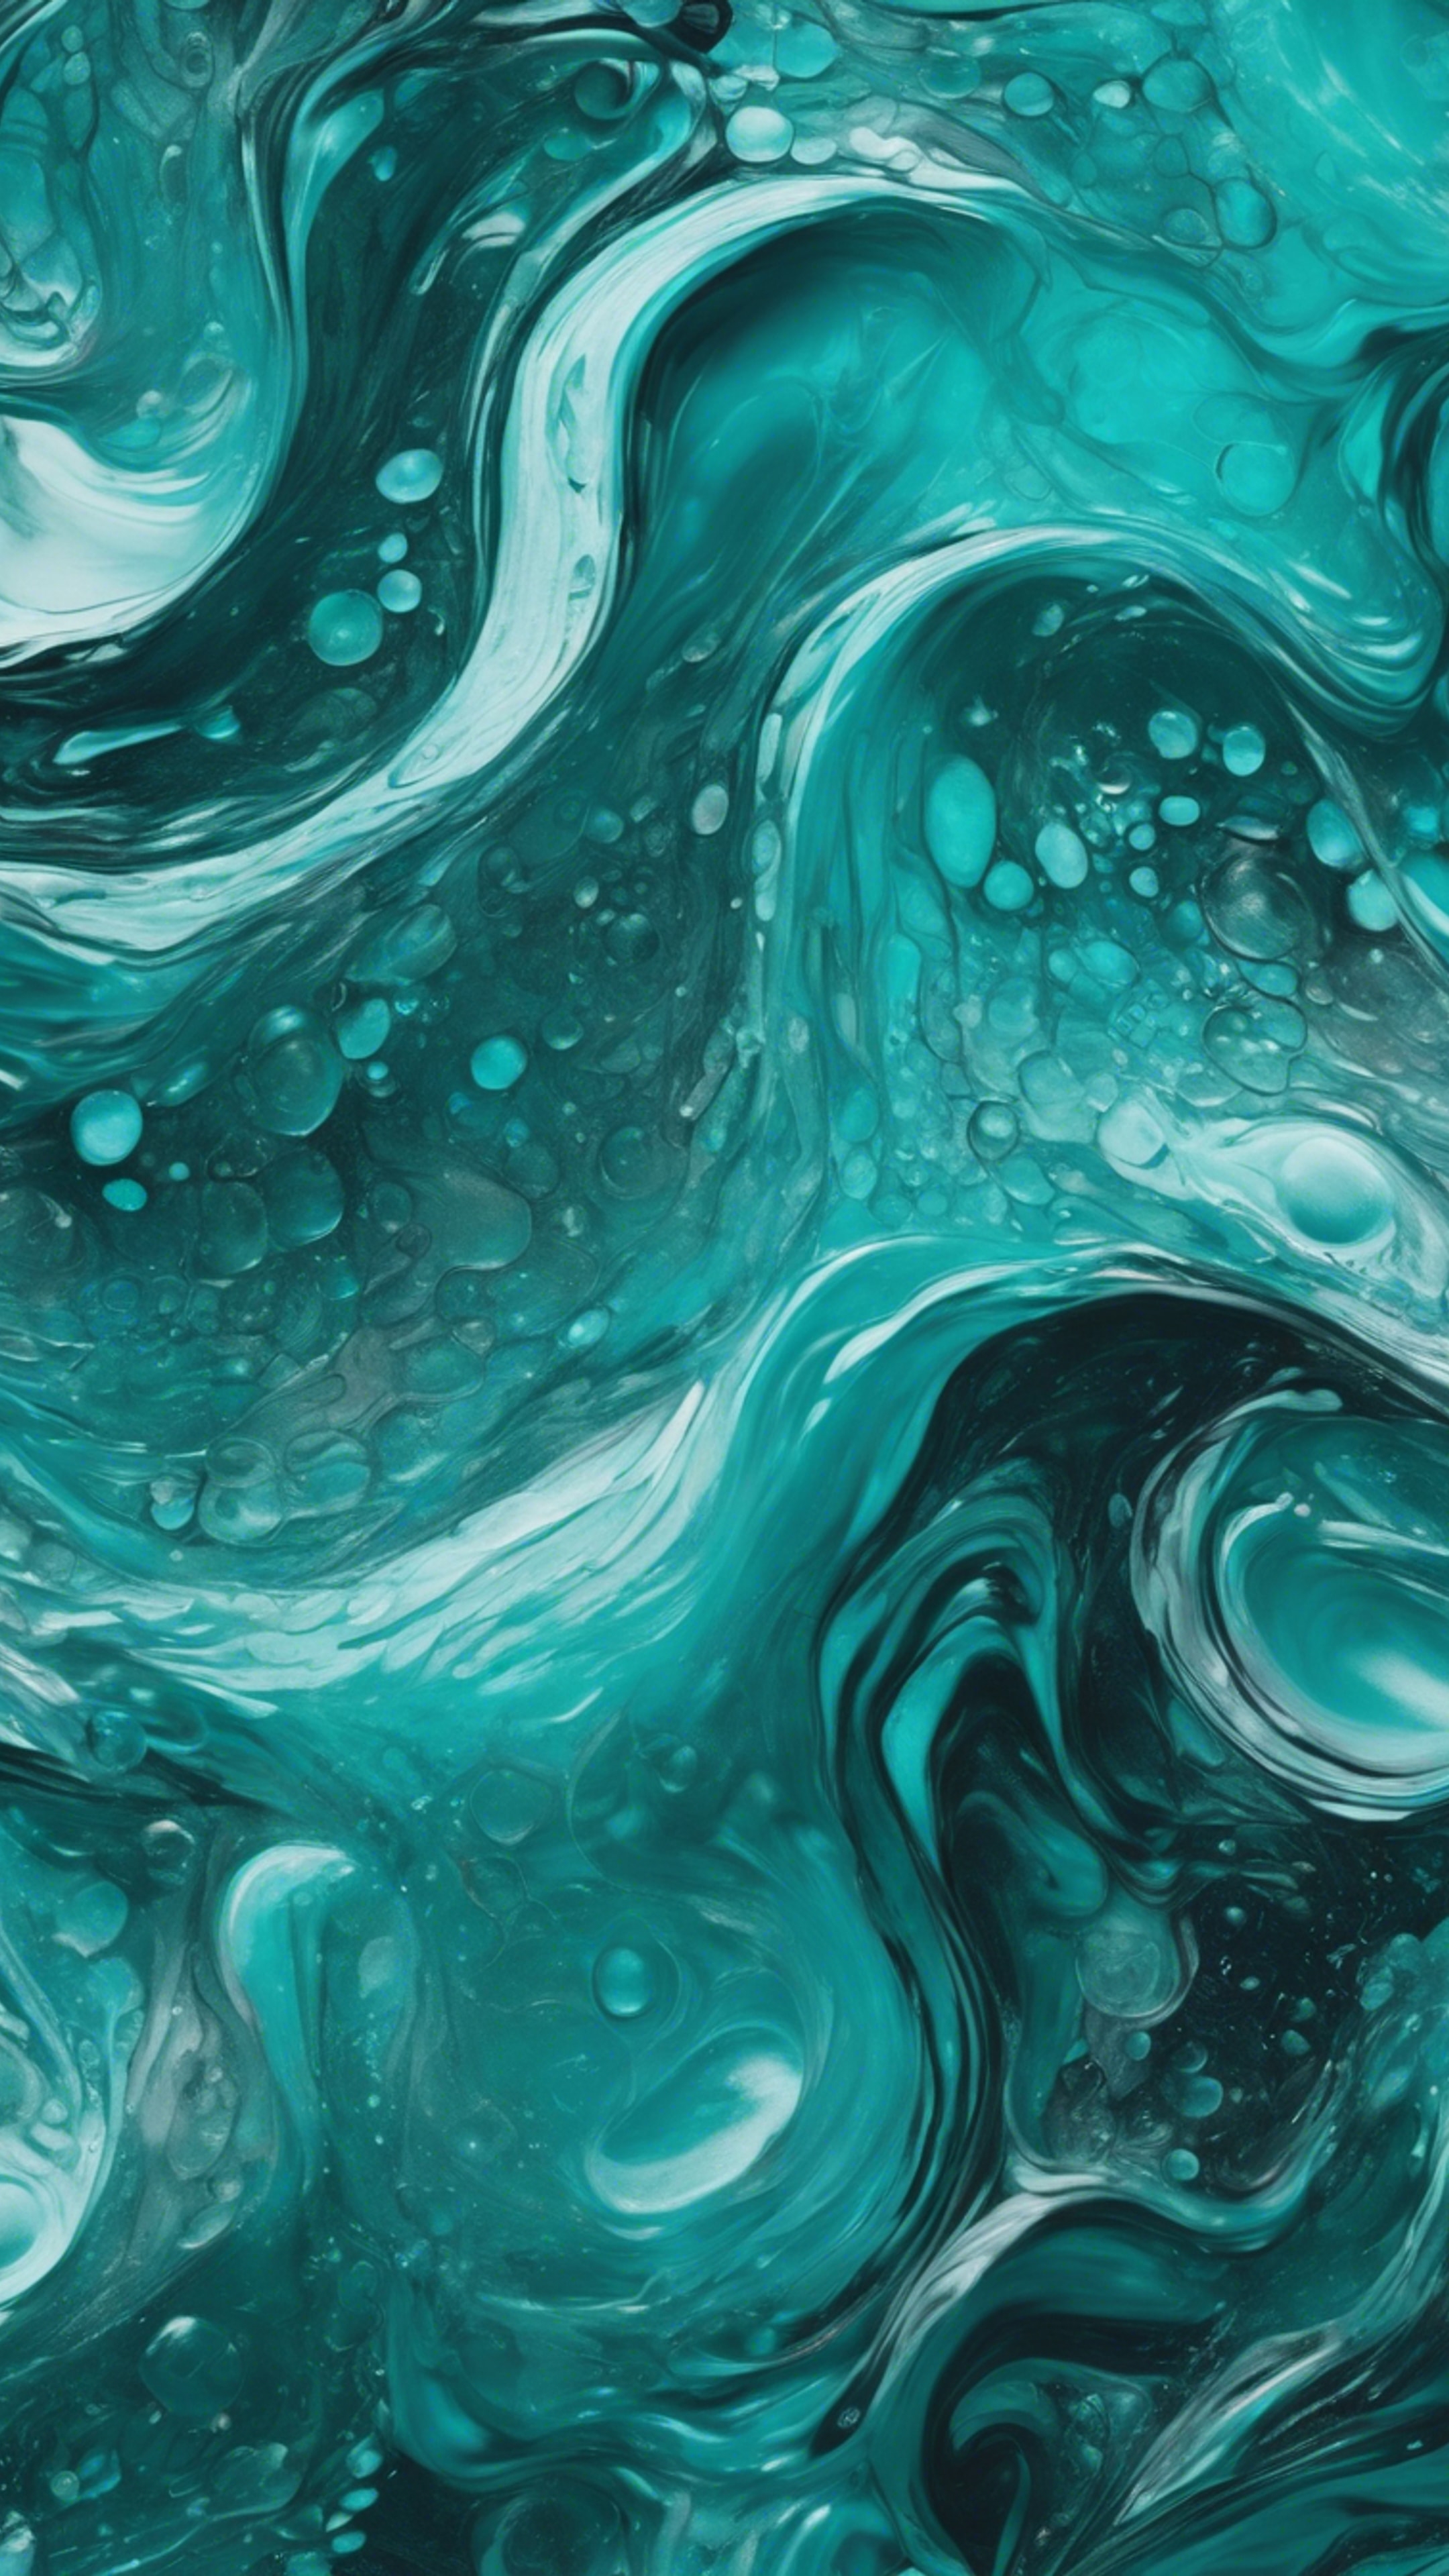 Abstract painting with swirling waves of shades of cool teal. Hình nền[053c1b1ade8044ef8a45]